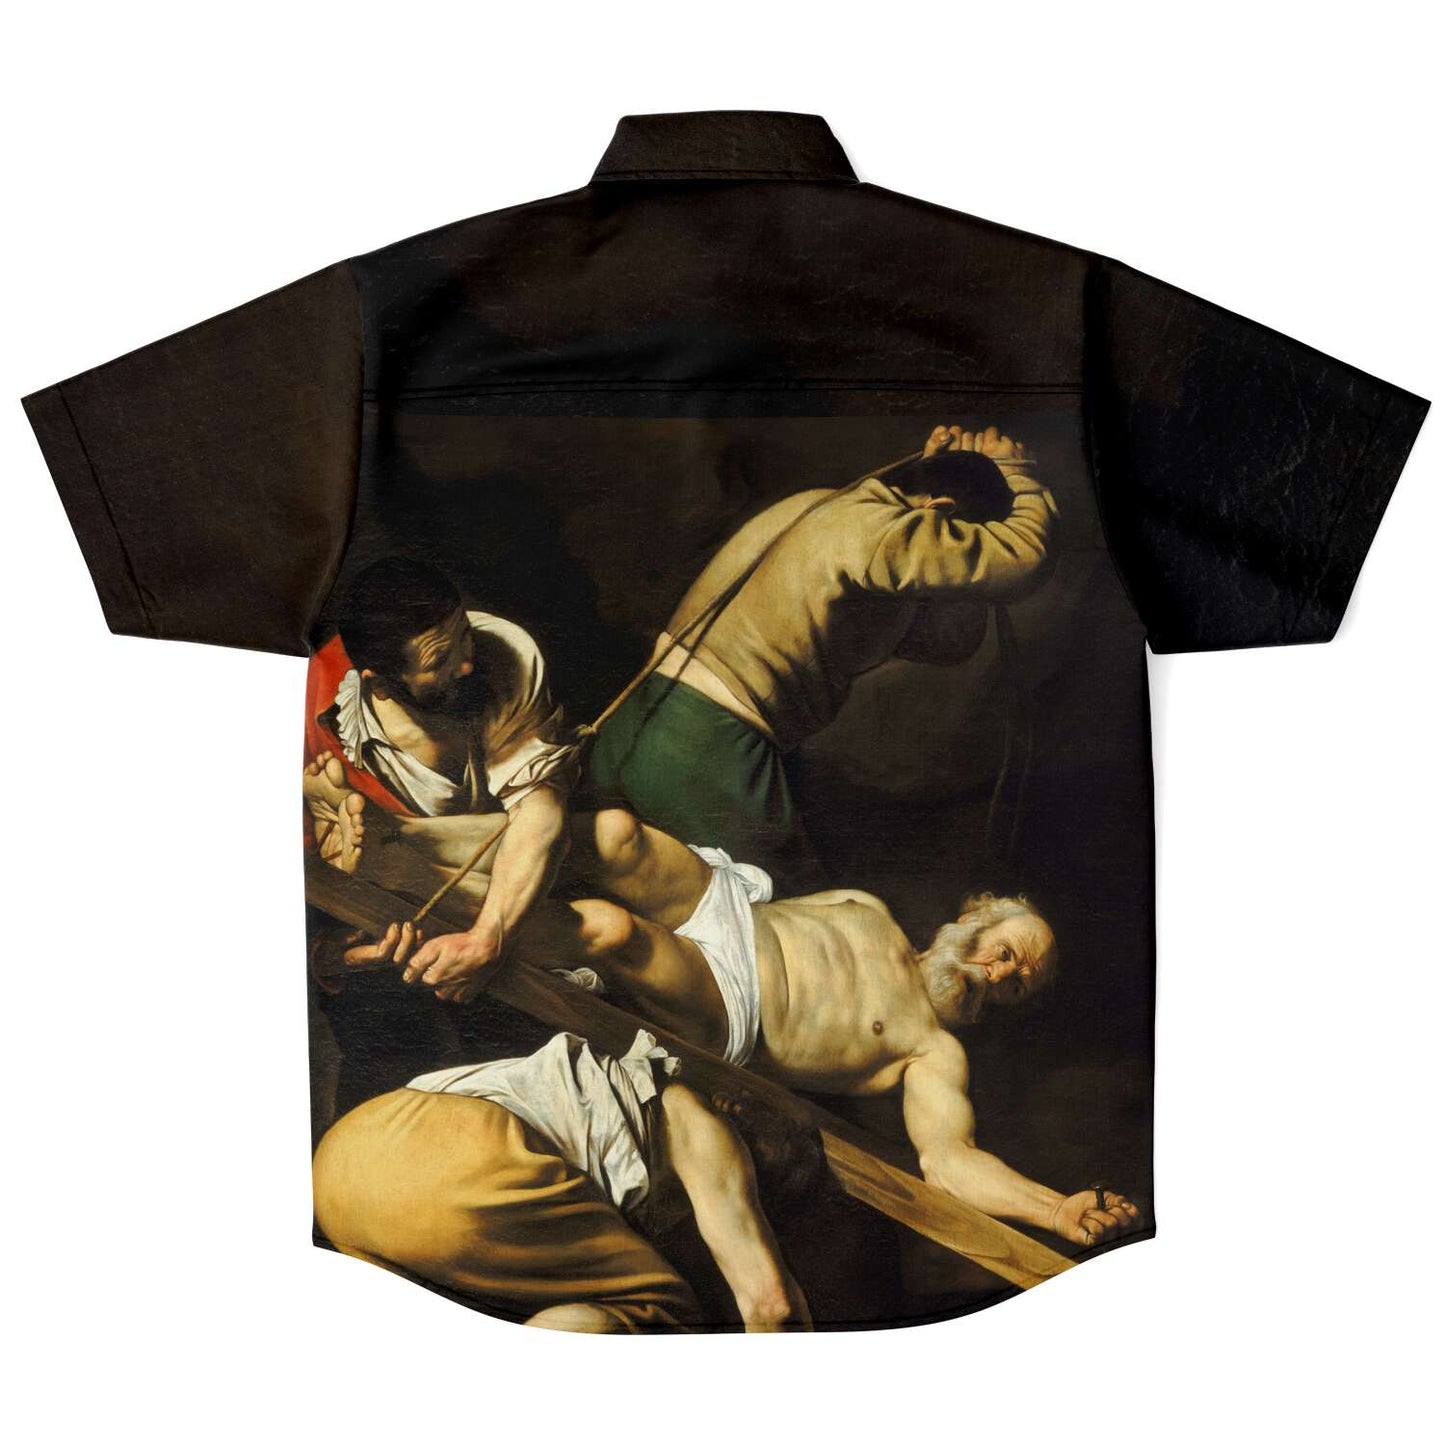 CARAVAGGIO CRUCIFIXION OF ST. PETER BUTTONED SHIRT